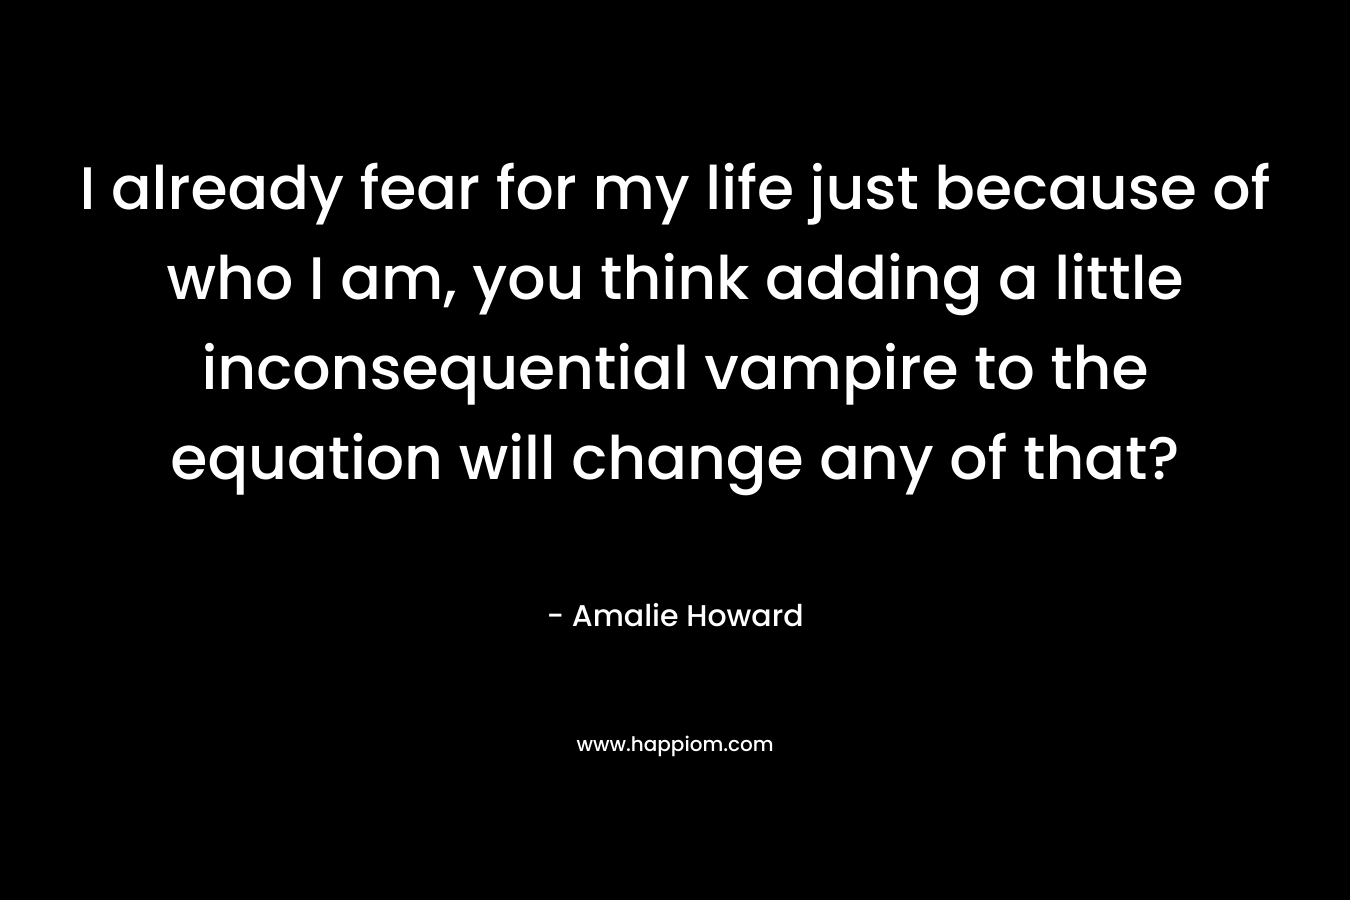 I already fear for my life just because of who I am, you think adding a little inconsequential vampire to the equation will change any of that? – Amalie Howard